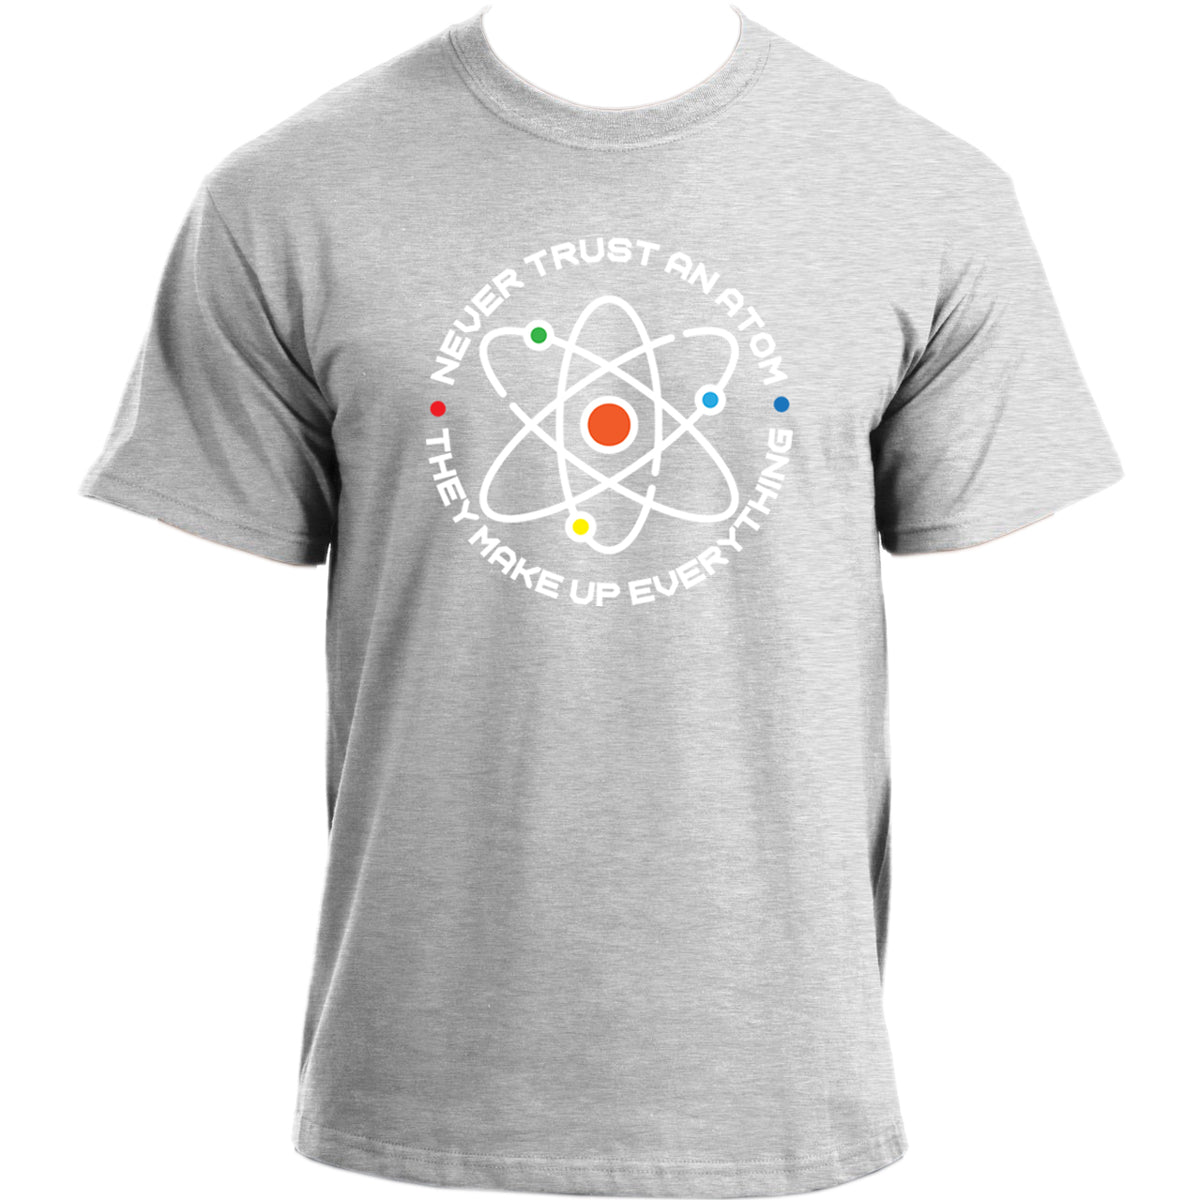 Never Trust an Atom They Make Up Everything I Chemistry Science Humor T-Shirt